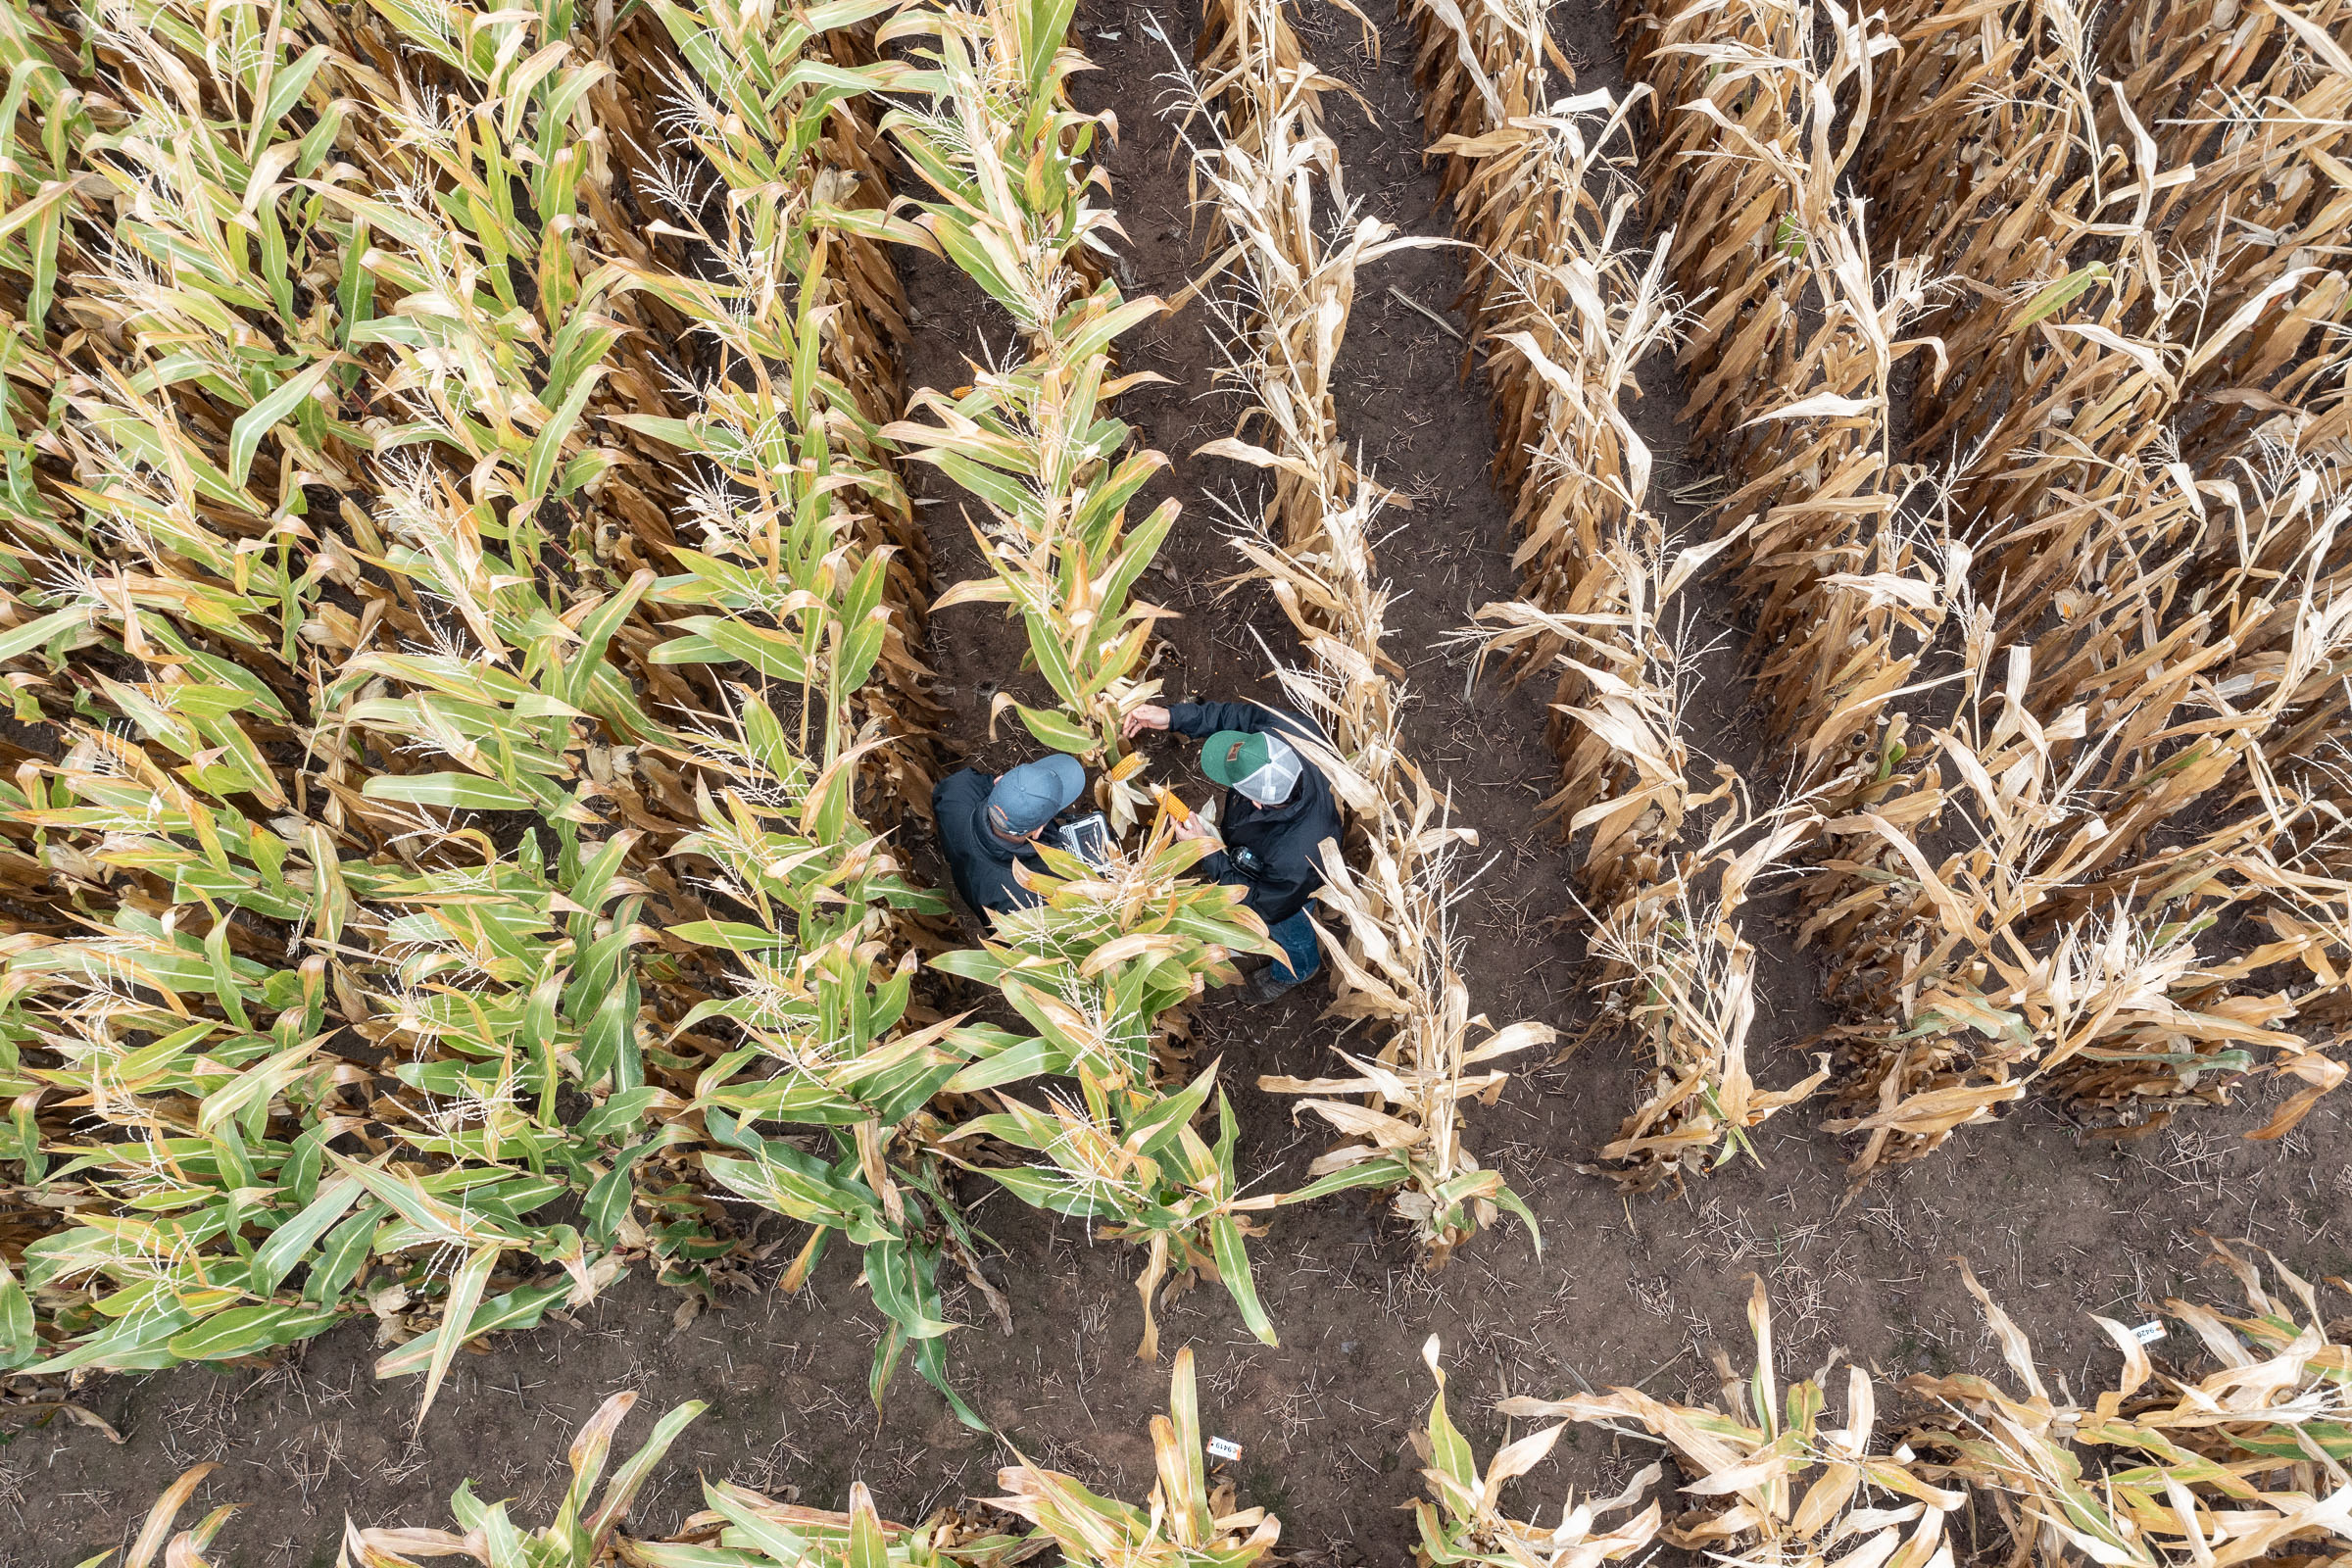 From the drone perspective, the difference between the conventional and low-input varieties (shown on the left) is clearly visible.